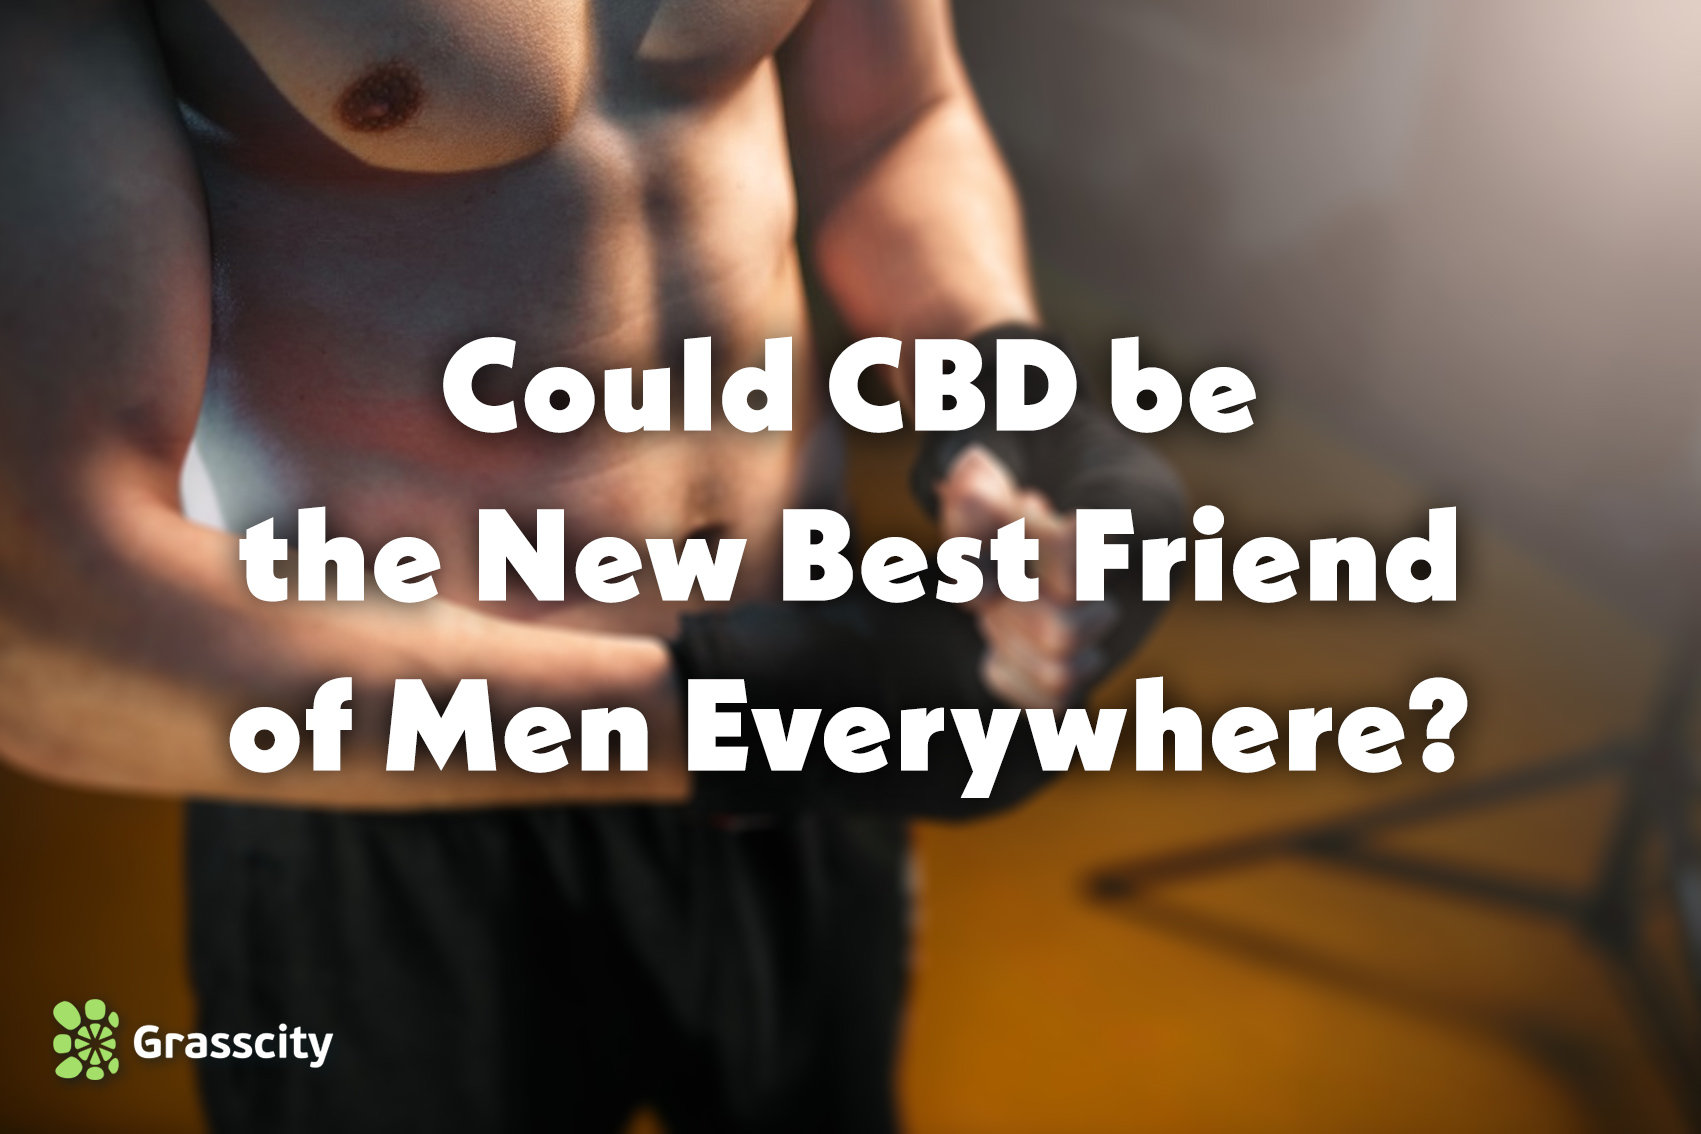 Could CBD be the New Best Friend of Men Everywhere?